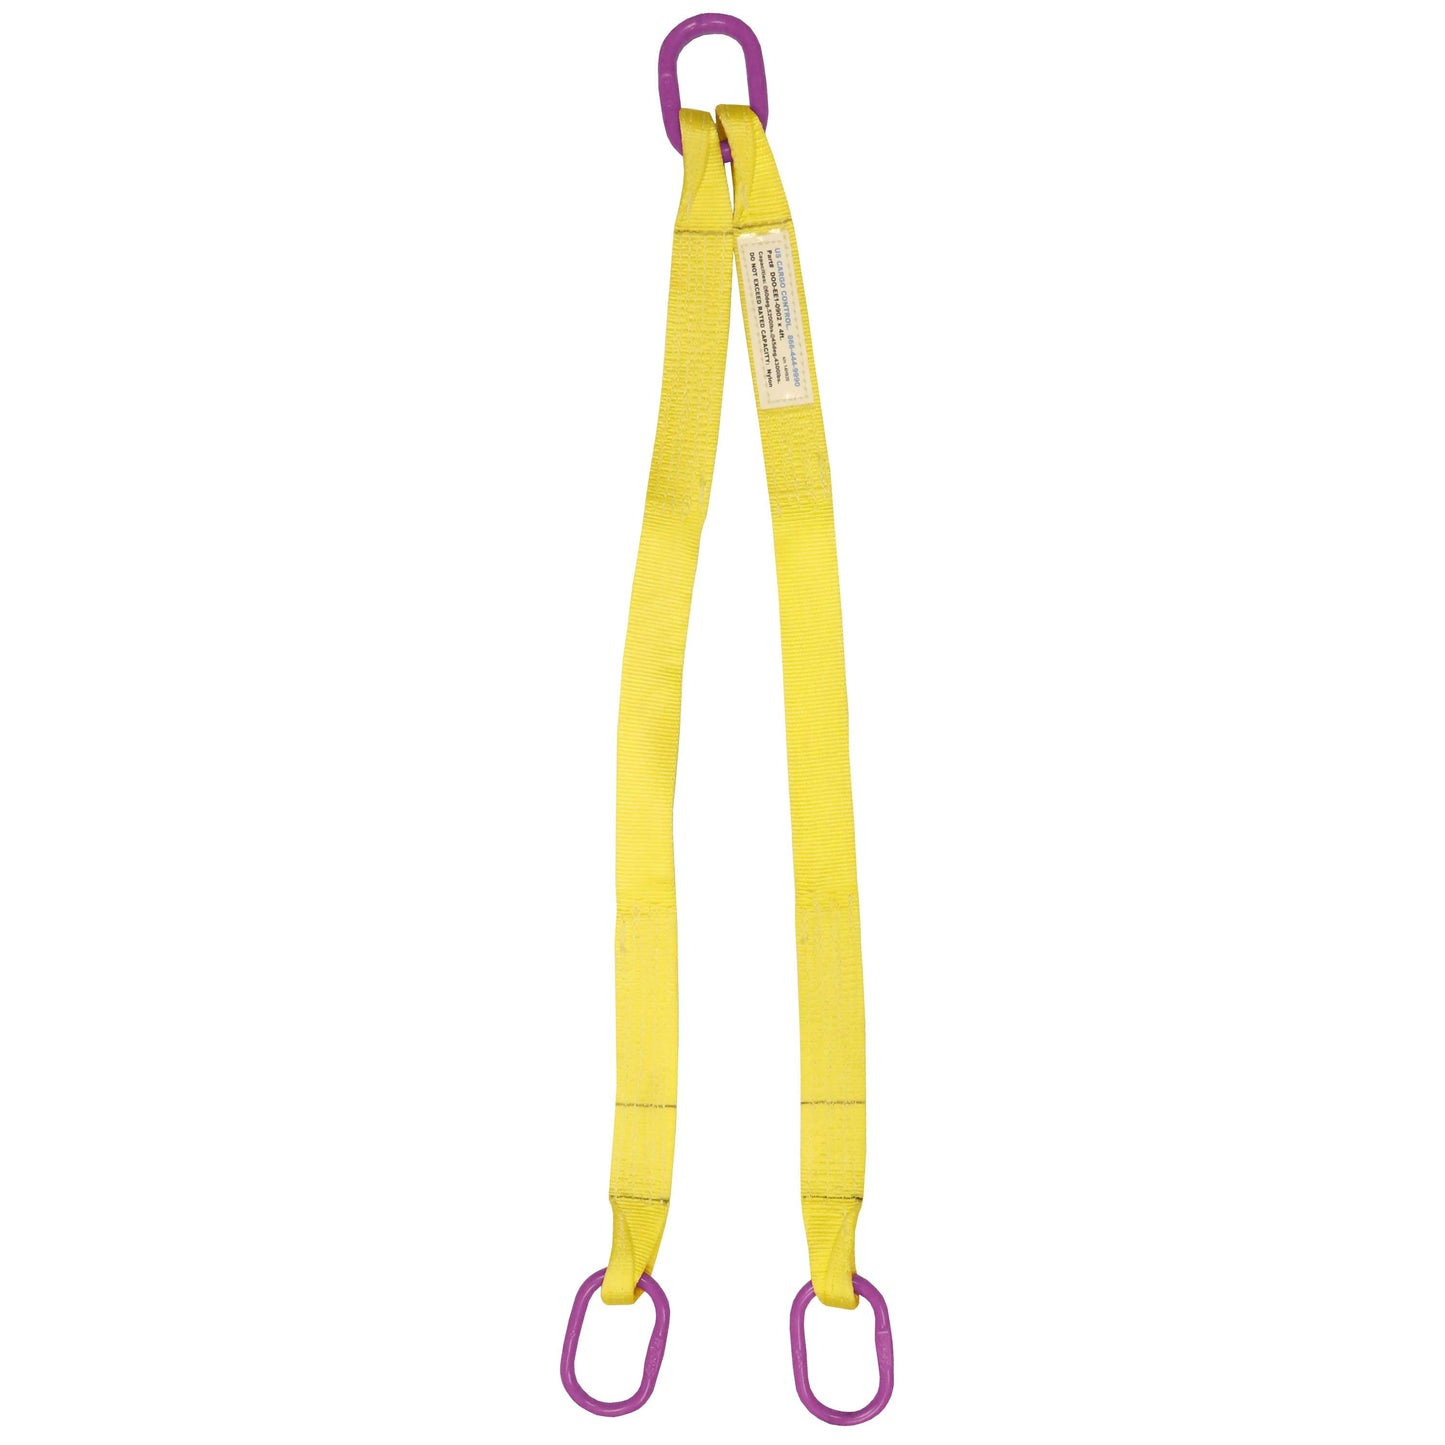 1 inchx3 foot (1 ply) Double Leg Nylon Sling w Master Link Both Ends image